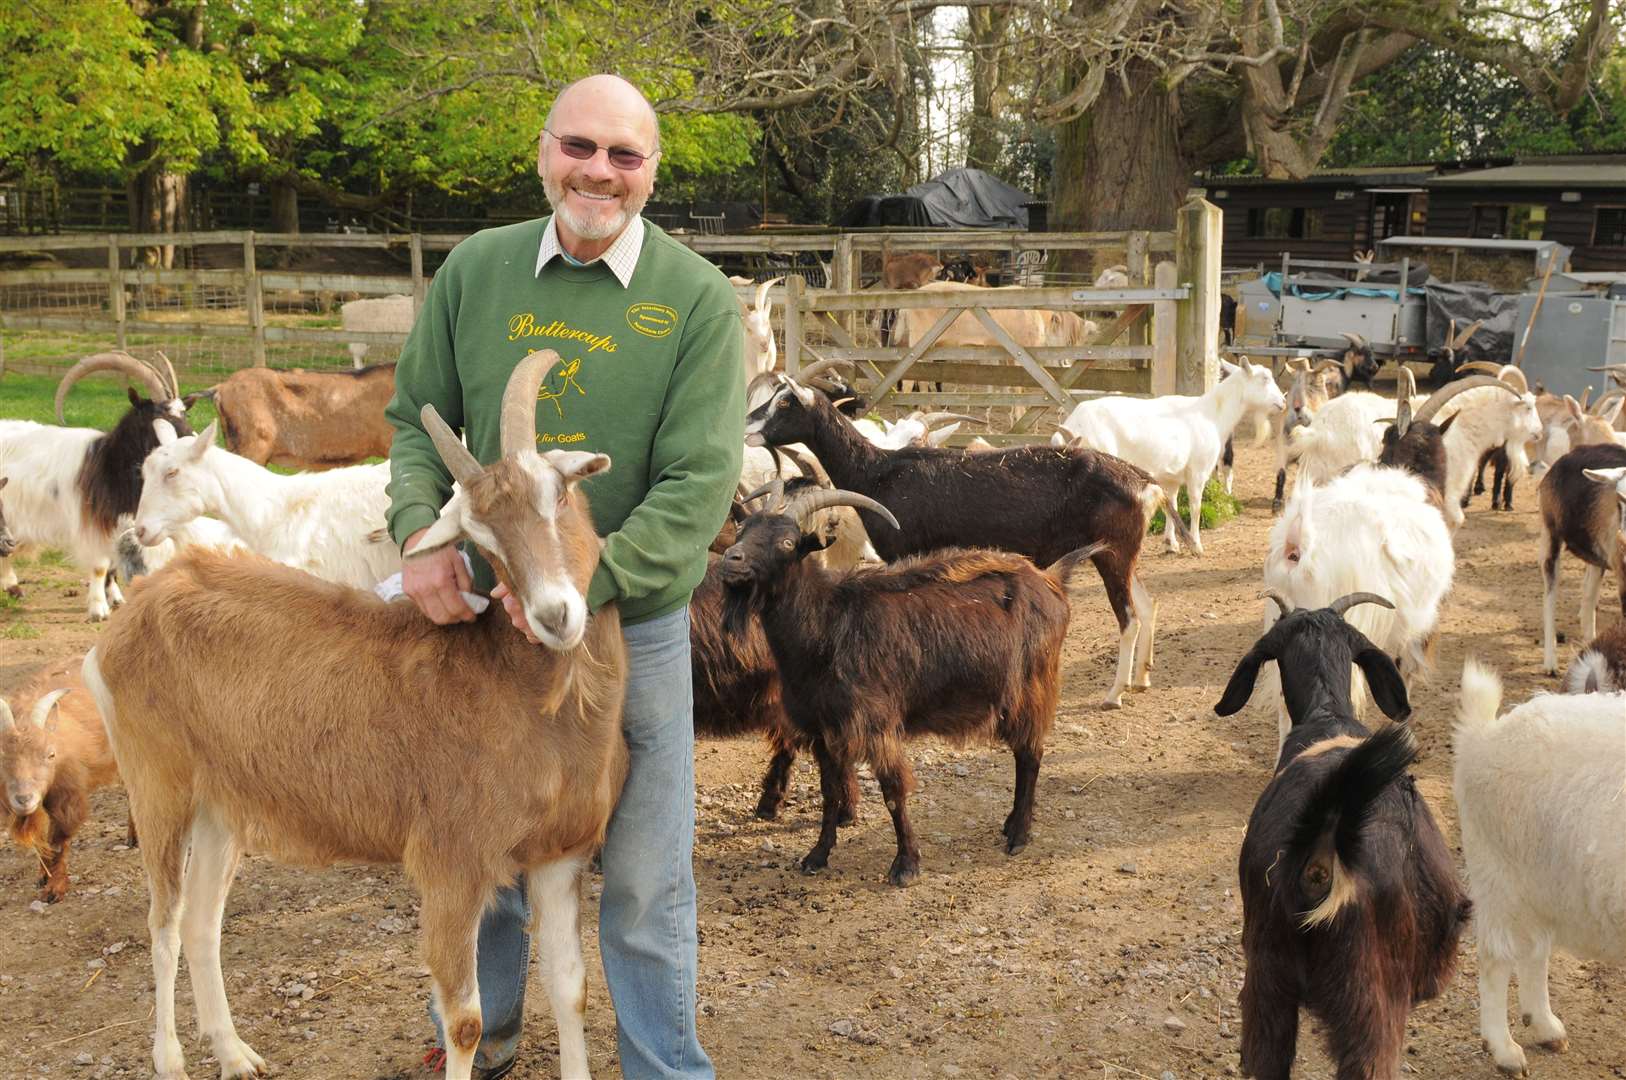 Founder Robert Hitch with some of the goats at Buttercups Goat Sanctuary. Picture: Steve Crispe